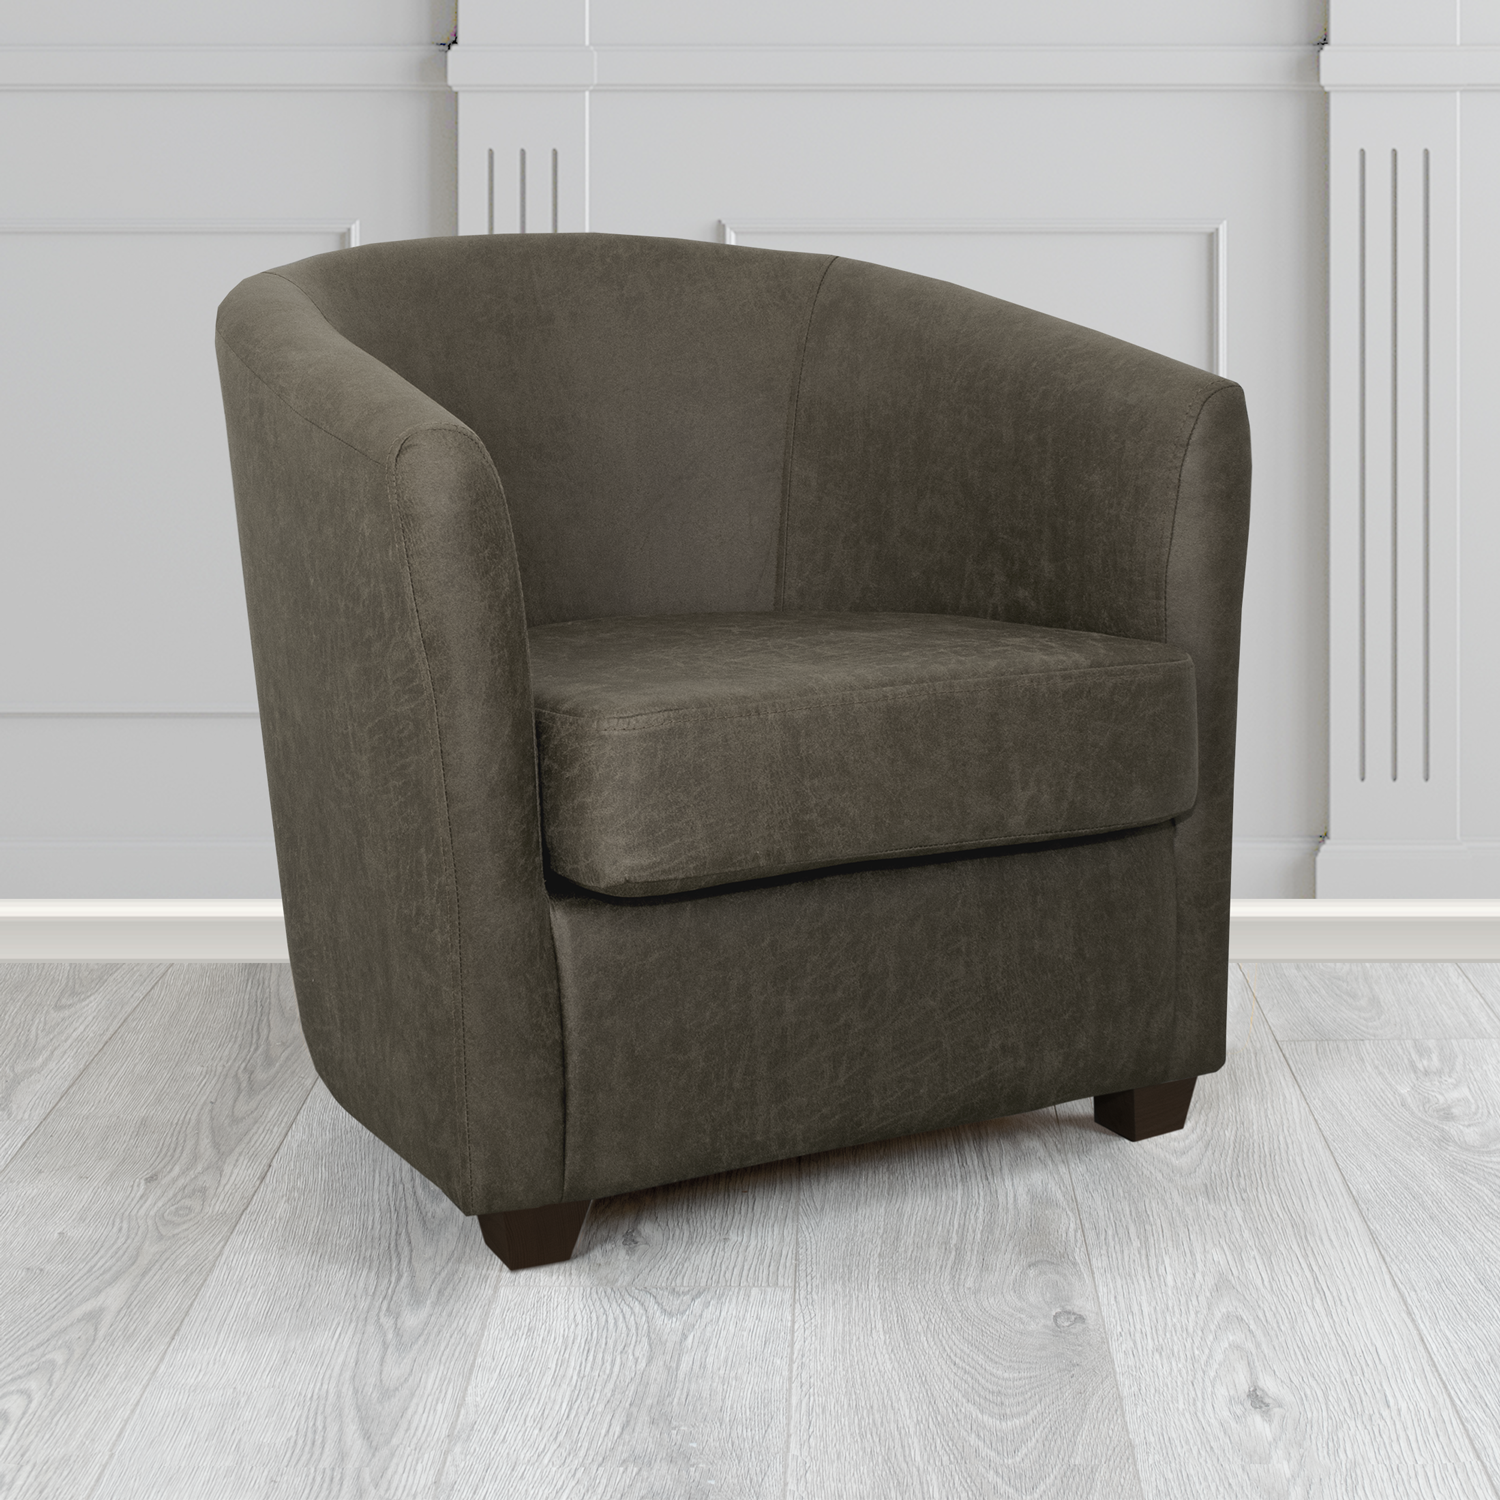 Cannes Tub Chair in Nevada Charcoal Faux Leather - The Tub Chair Shop